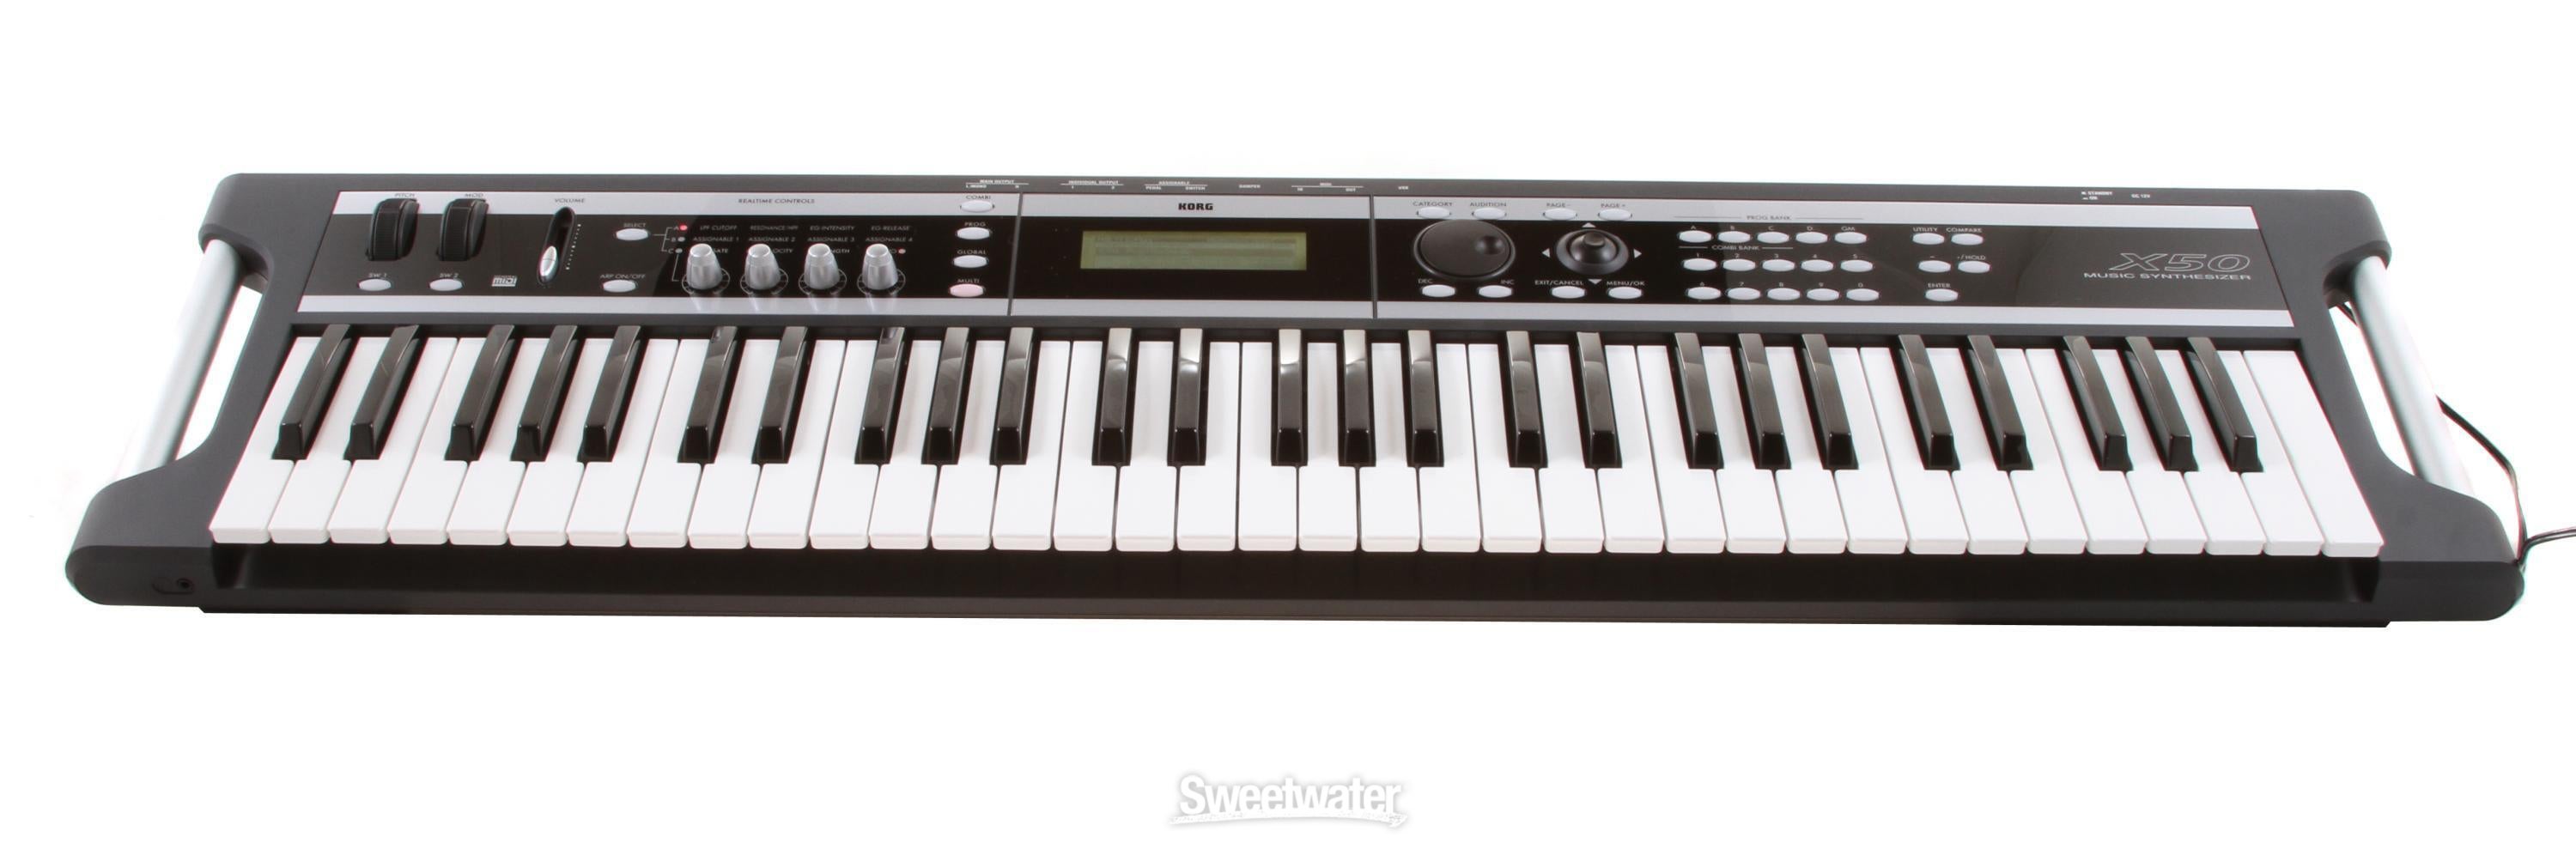 Korg X50 Reviews | Sweetwater